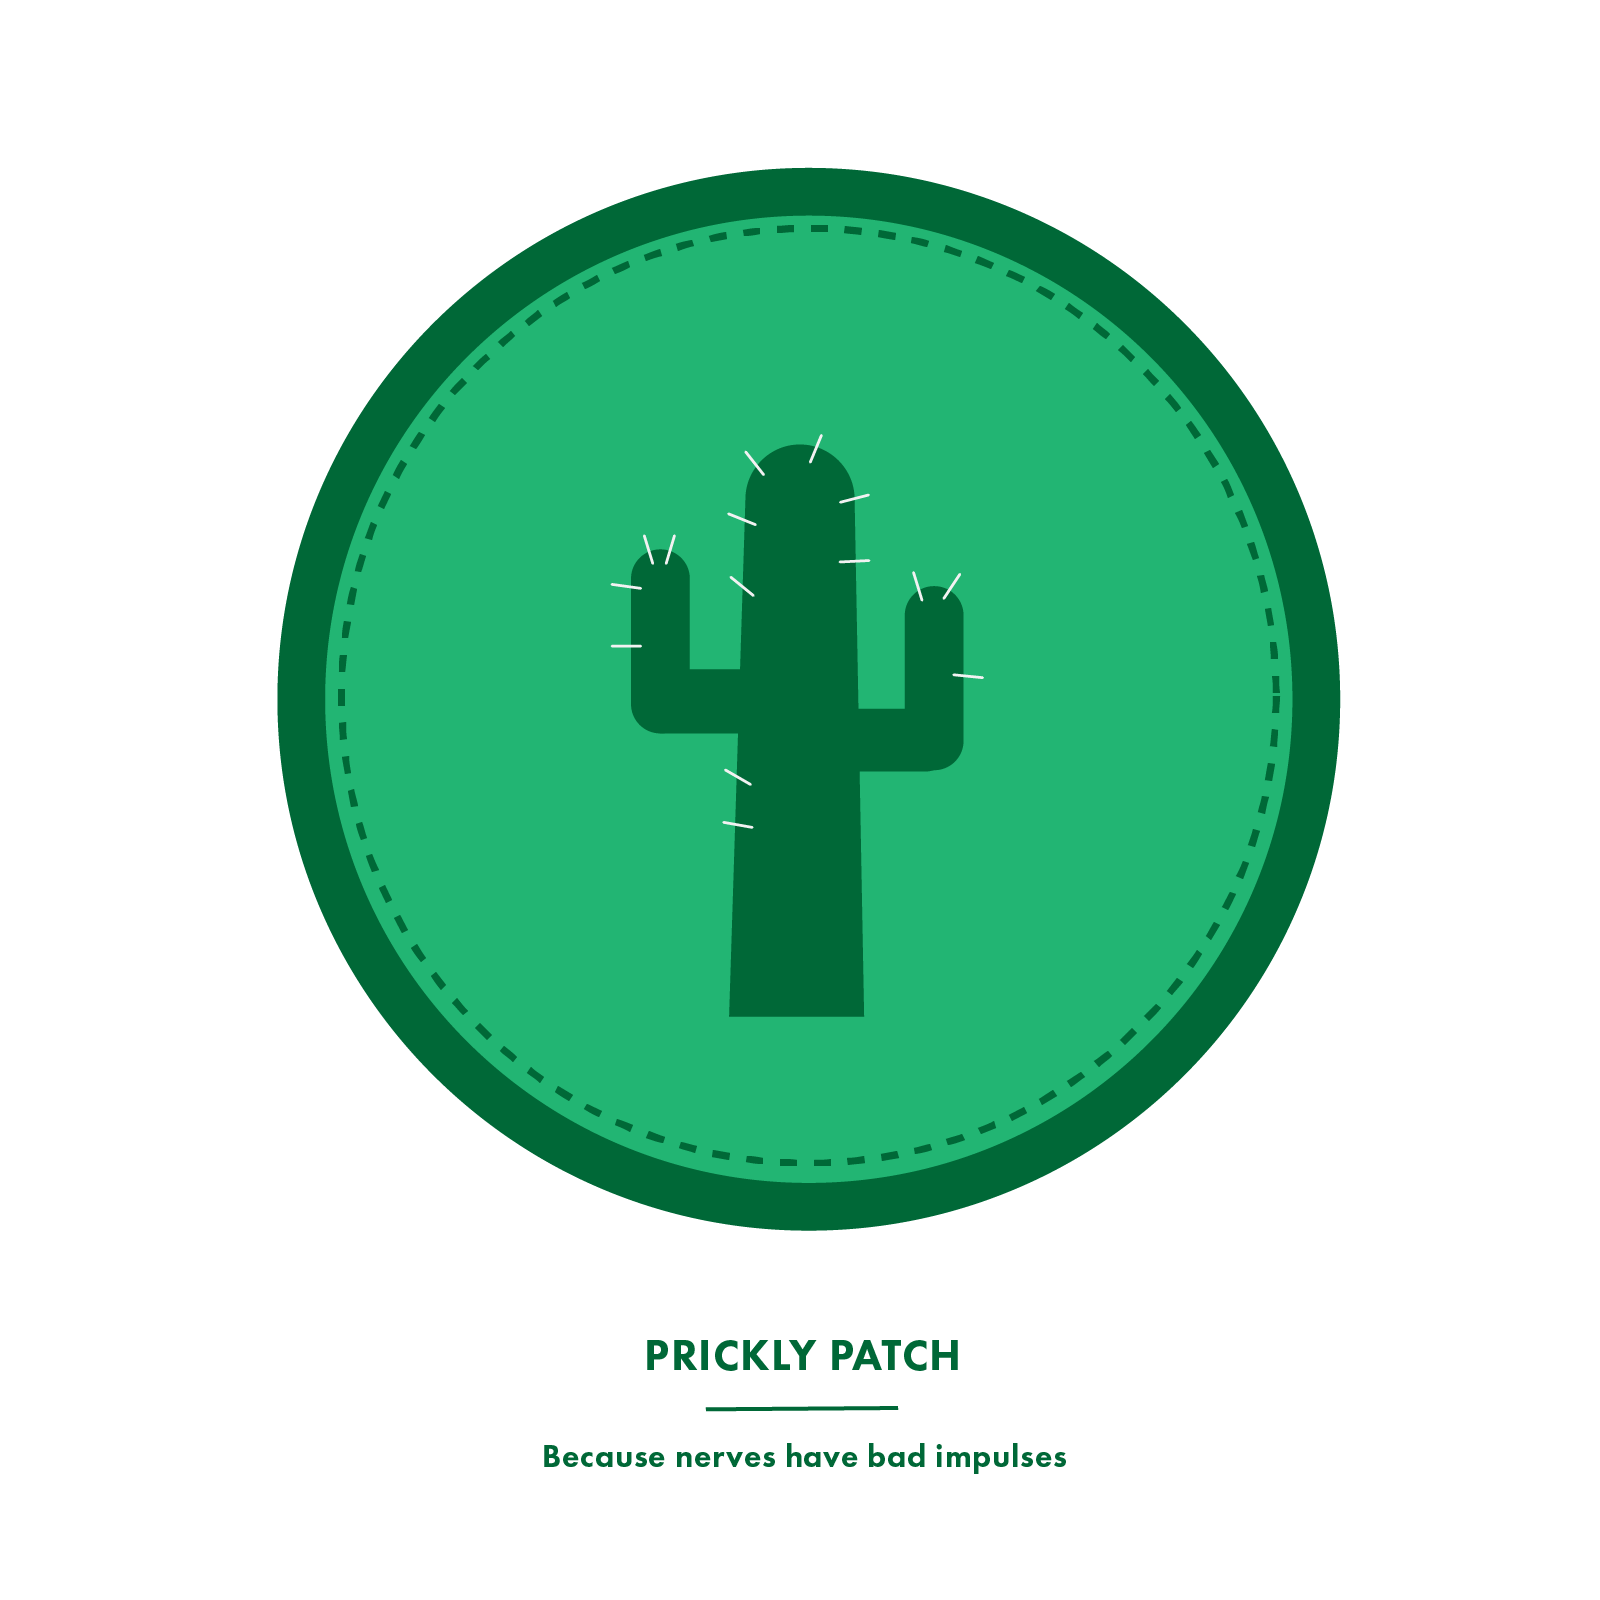 Prickly Patch@2x.png